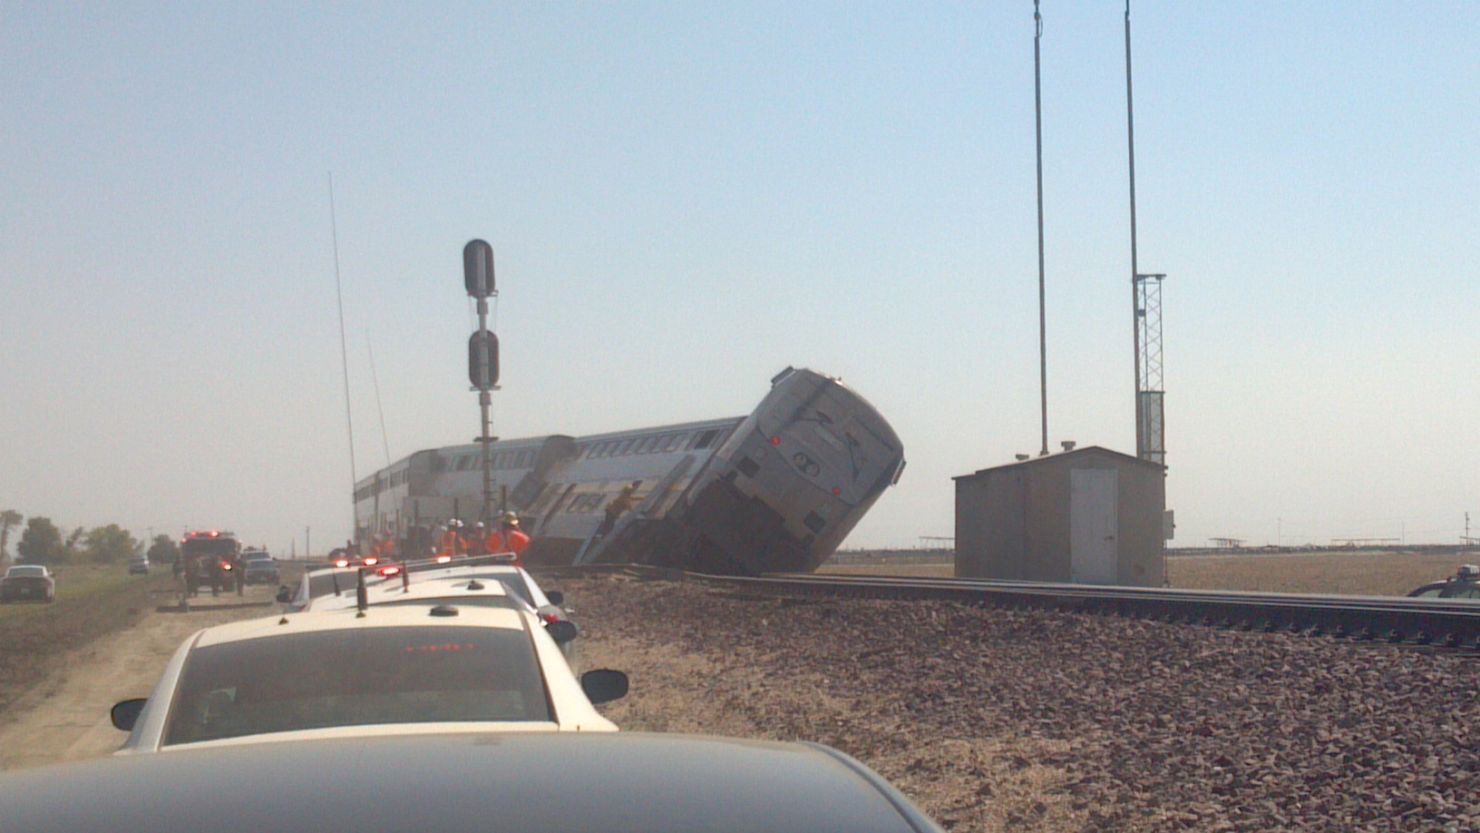 Amtrak Train 712 was traveling south from Oakland to Bakersfield, California when it collided with a big rig, Monday. 